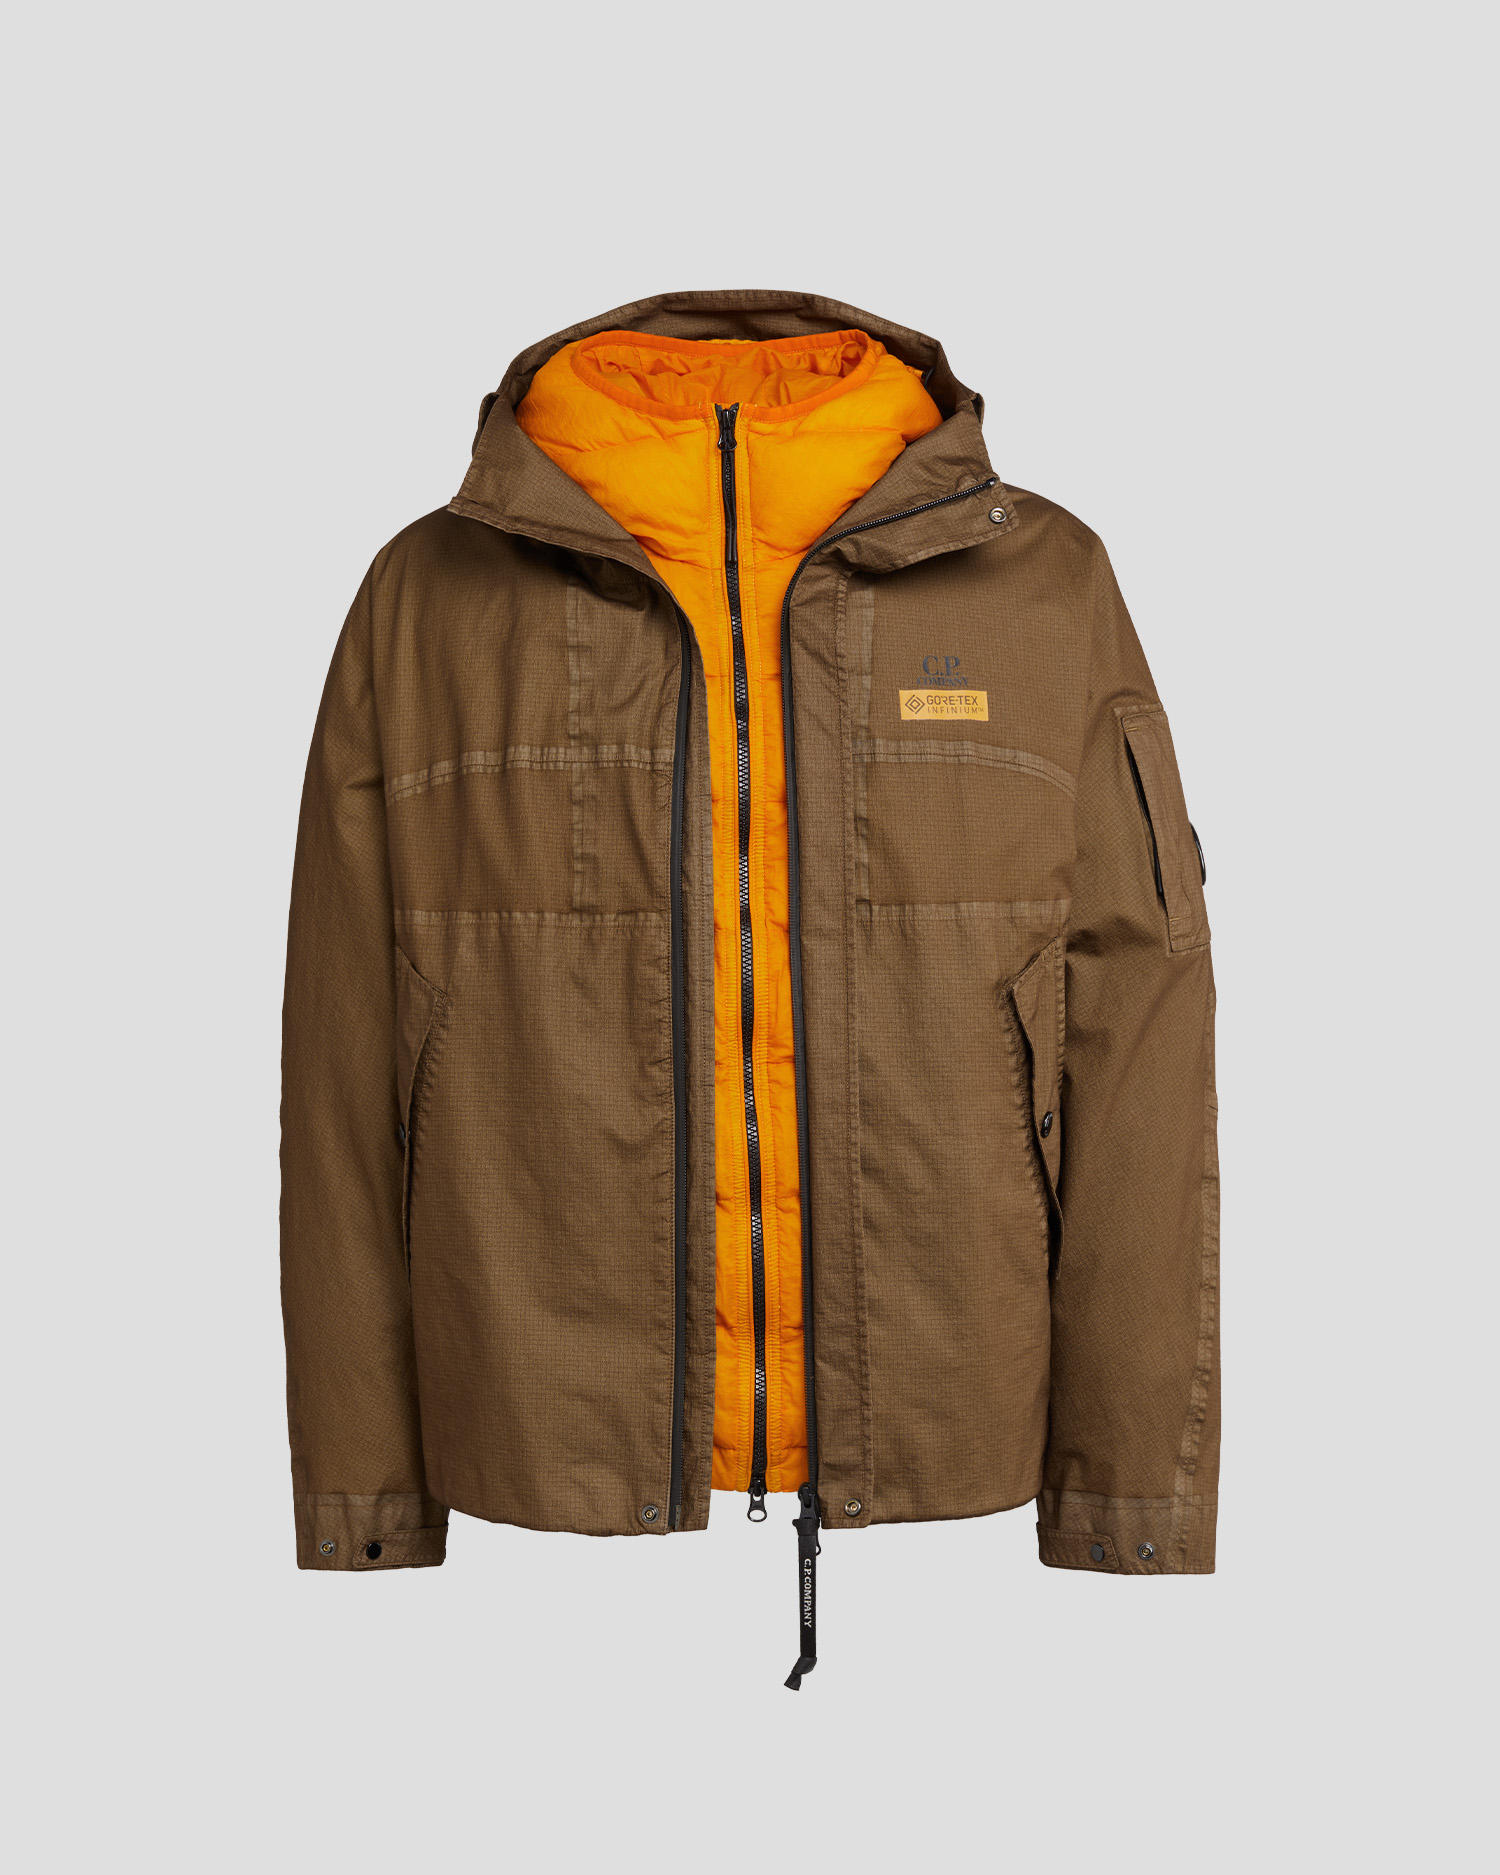 Gore G-type Hooded Jacket | C.P. Company Online Store